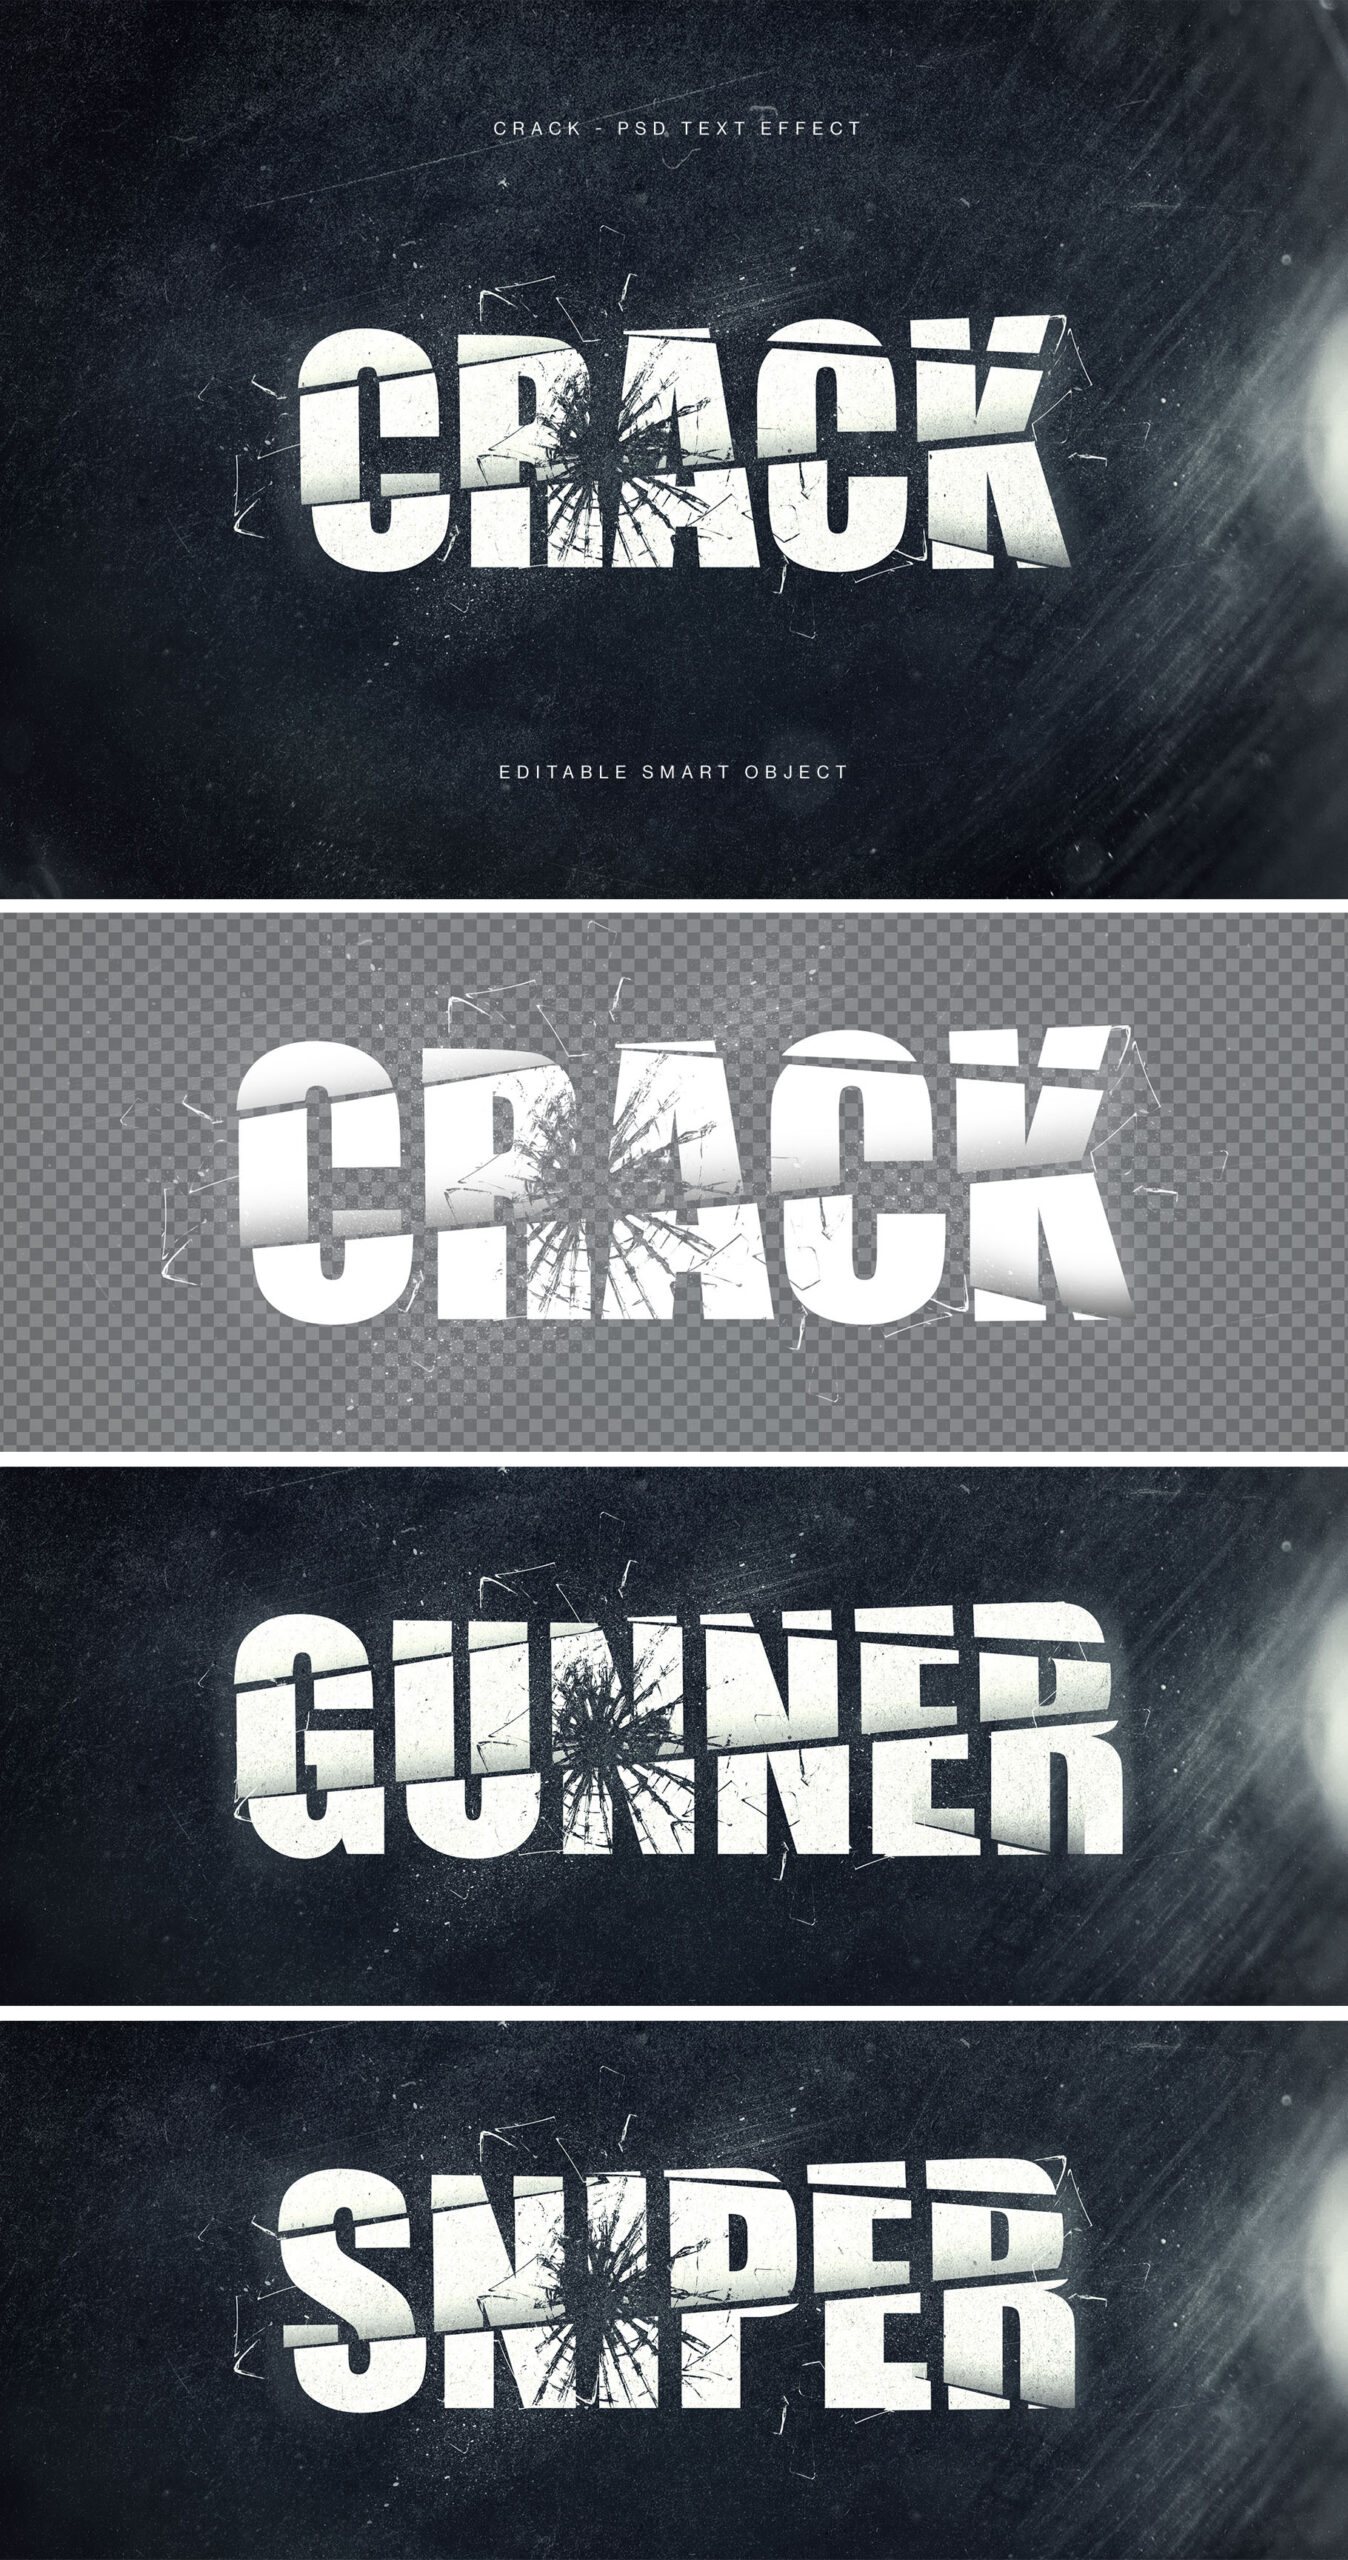 Cracked Text Effect in PSD format